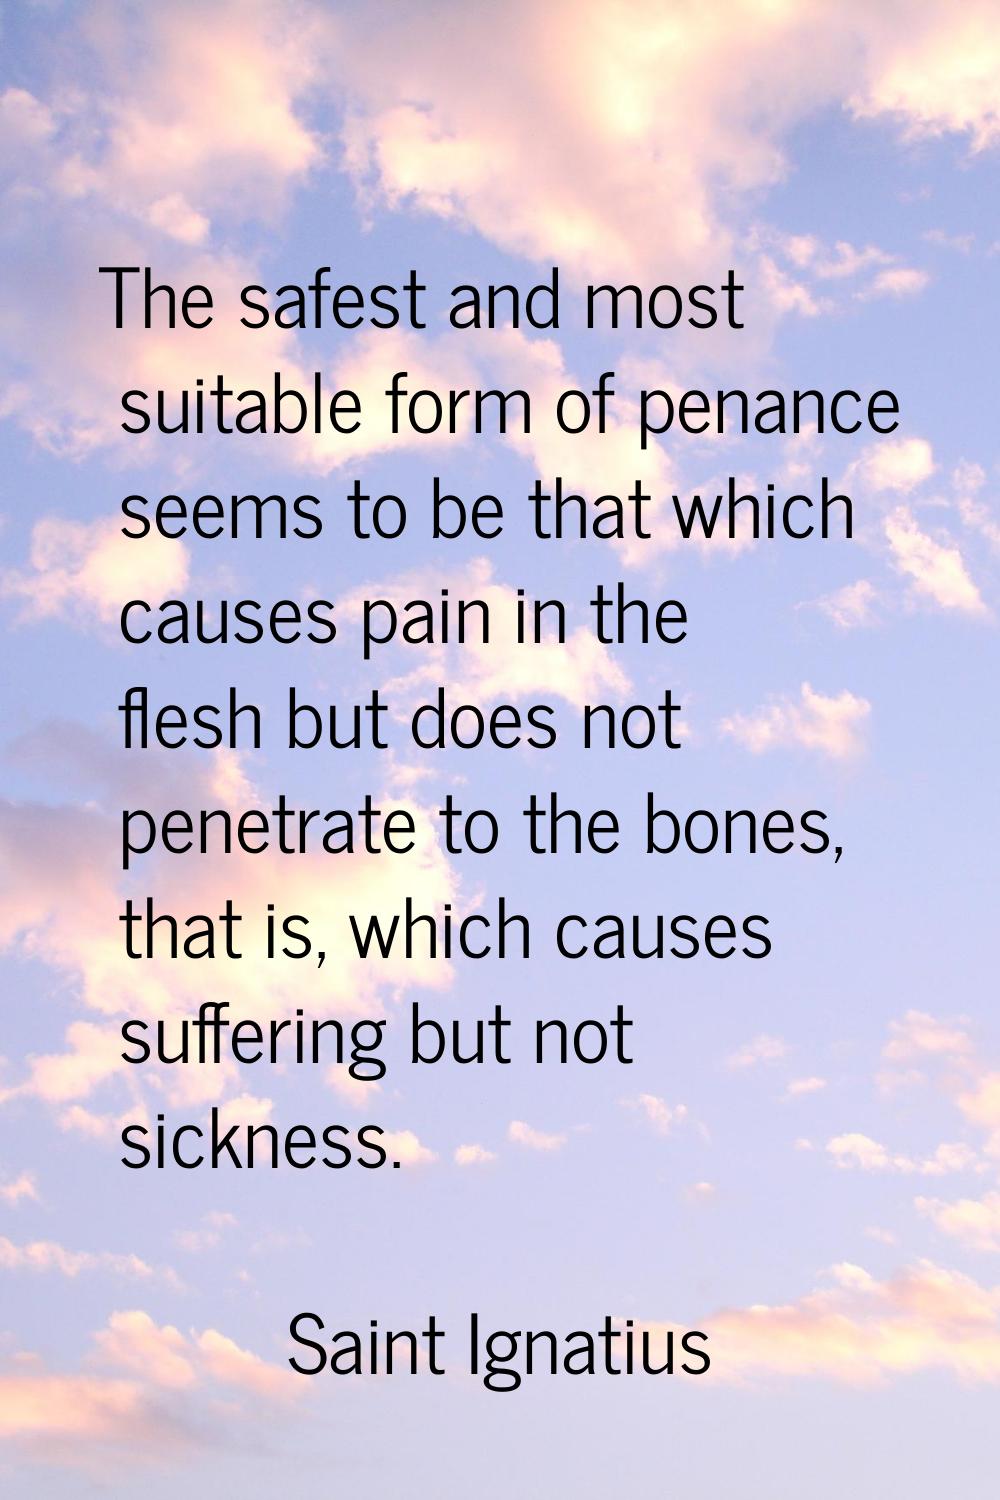 The safest and most suitable form of penance seems to be that which causes pain in the flesh but do